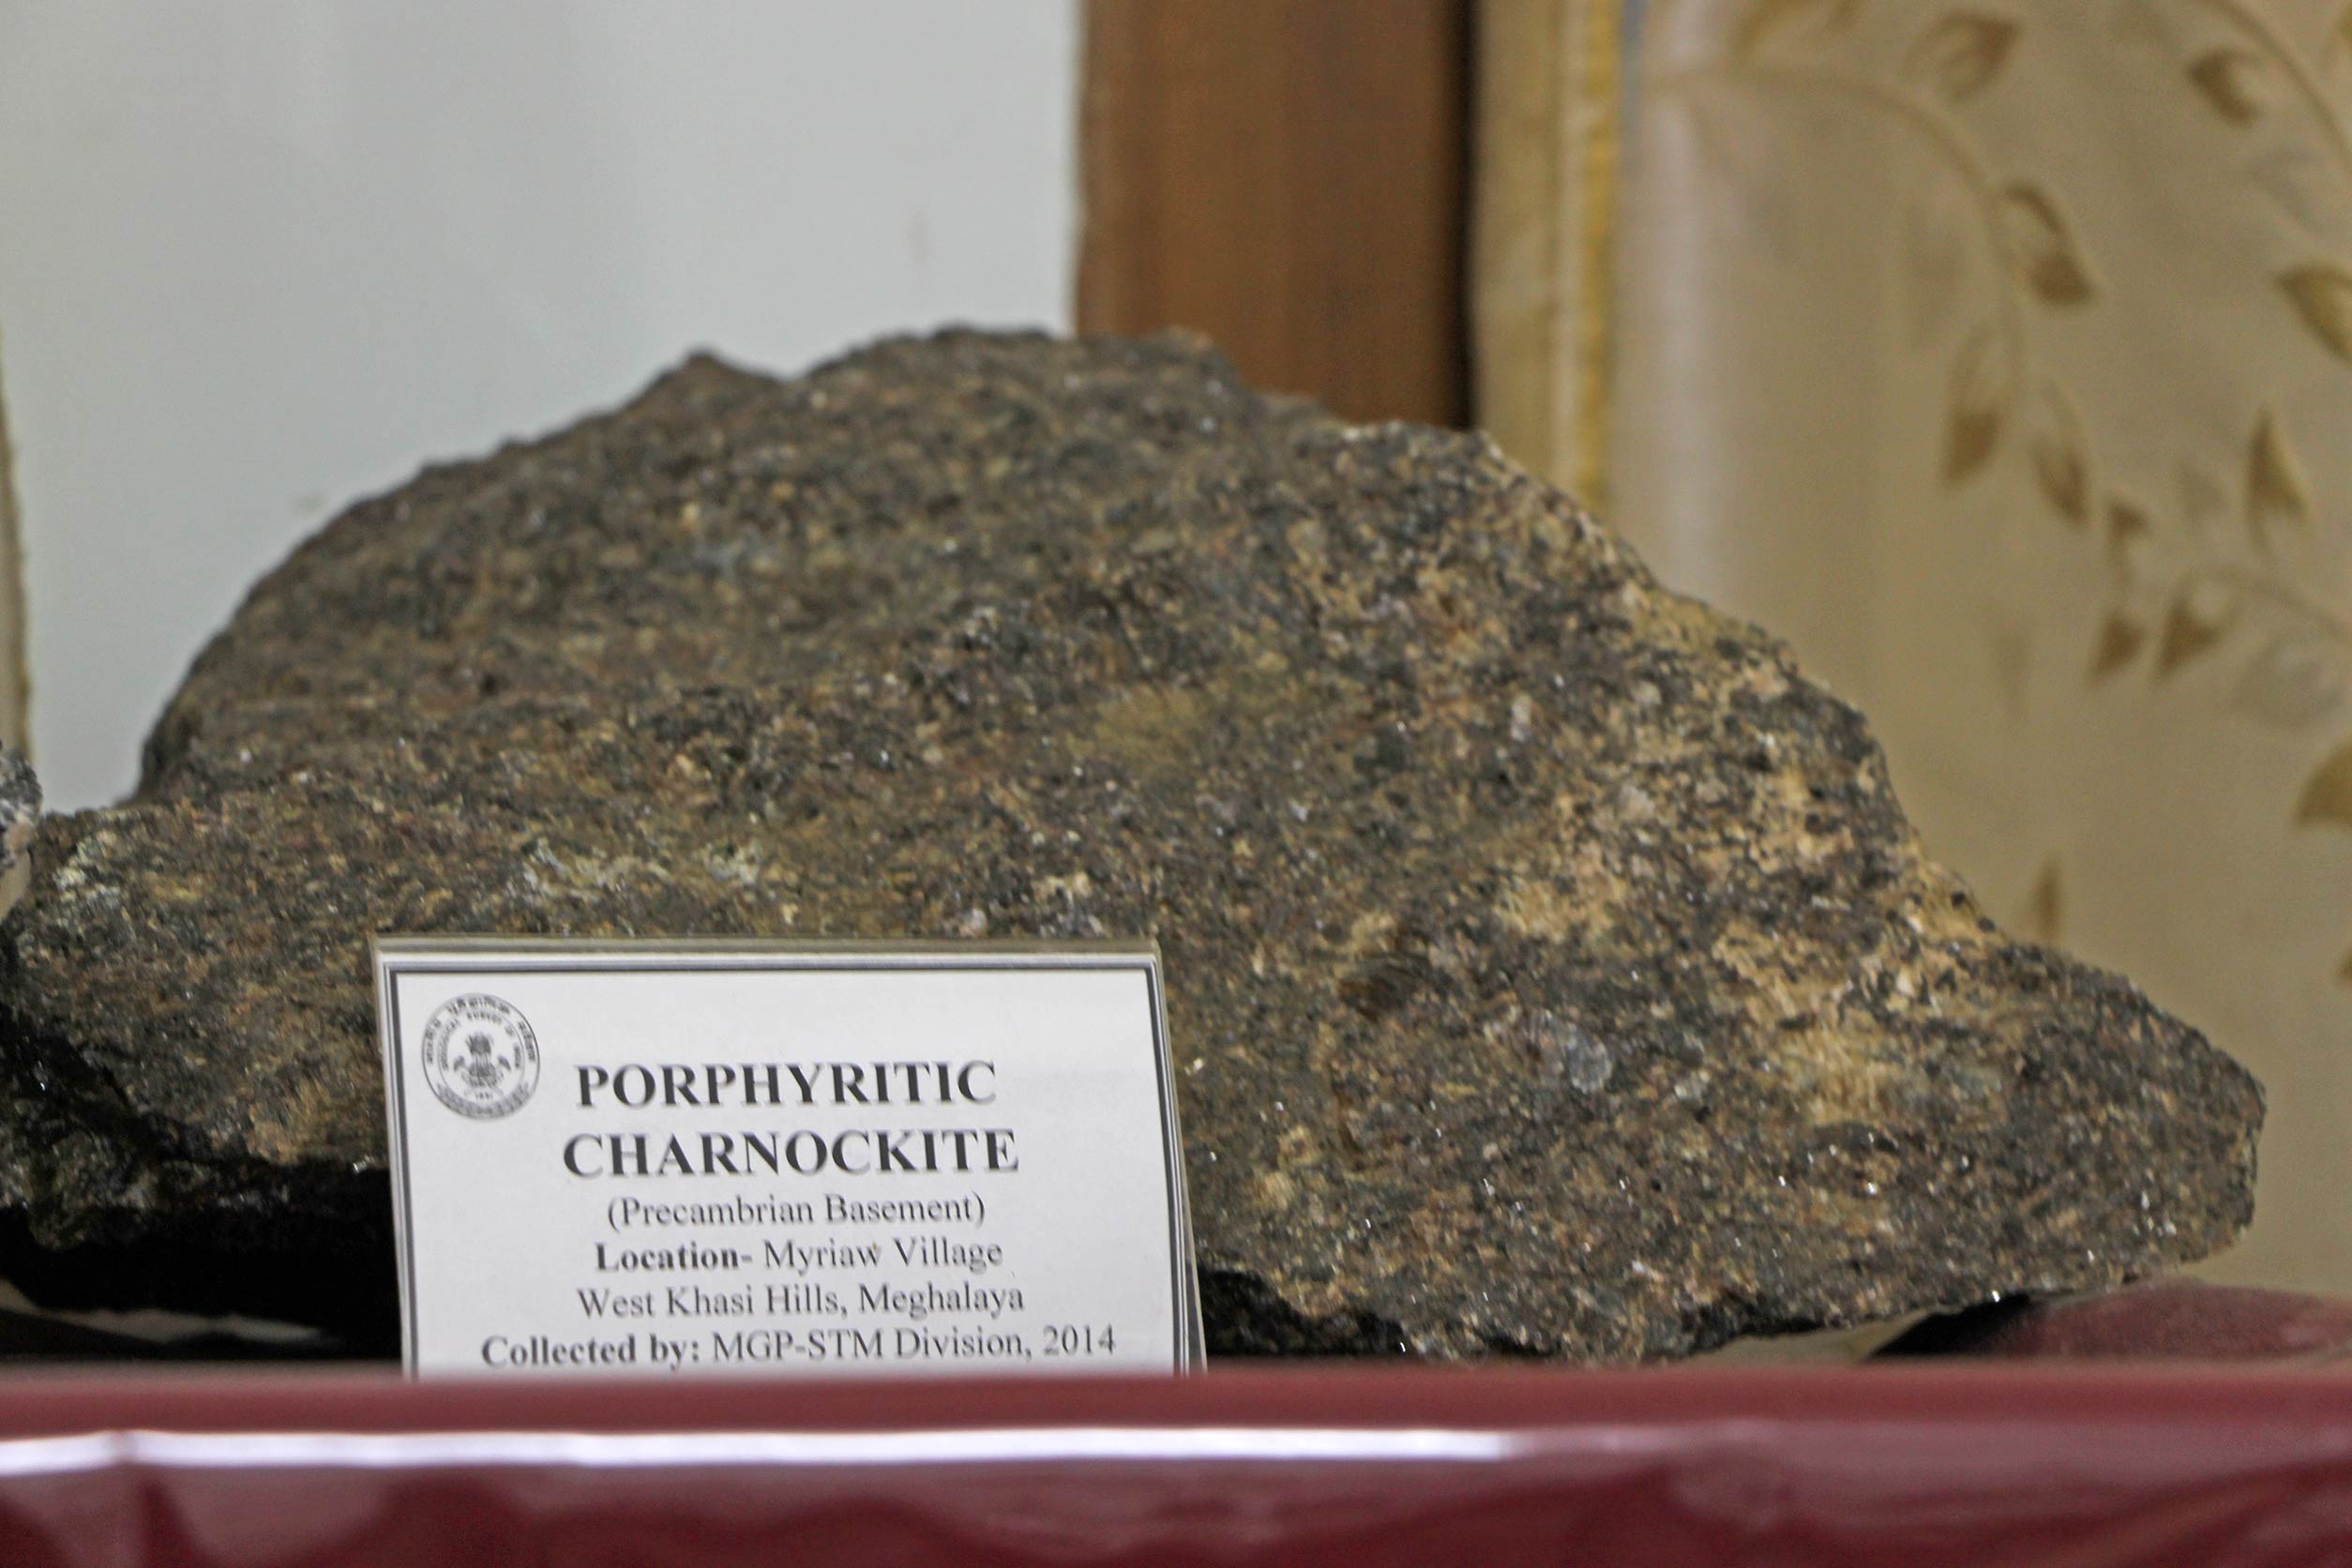 Porphyritic Charnockite found in the West Khasi Hills